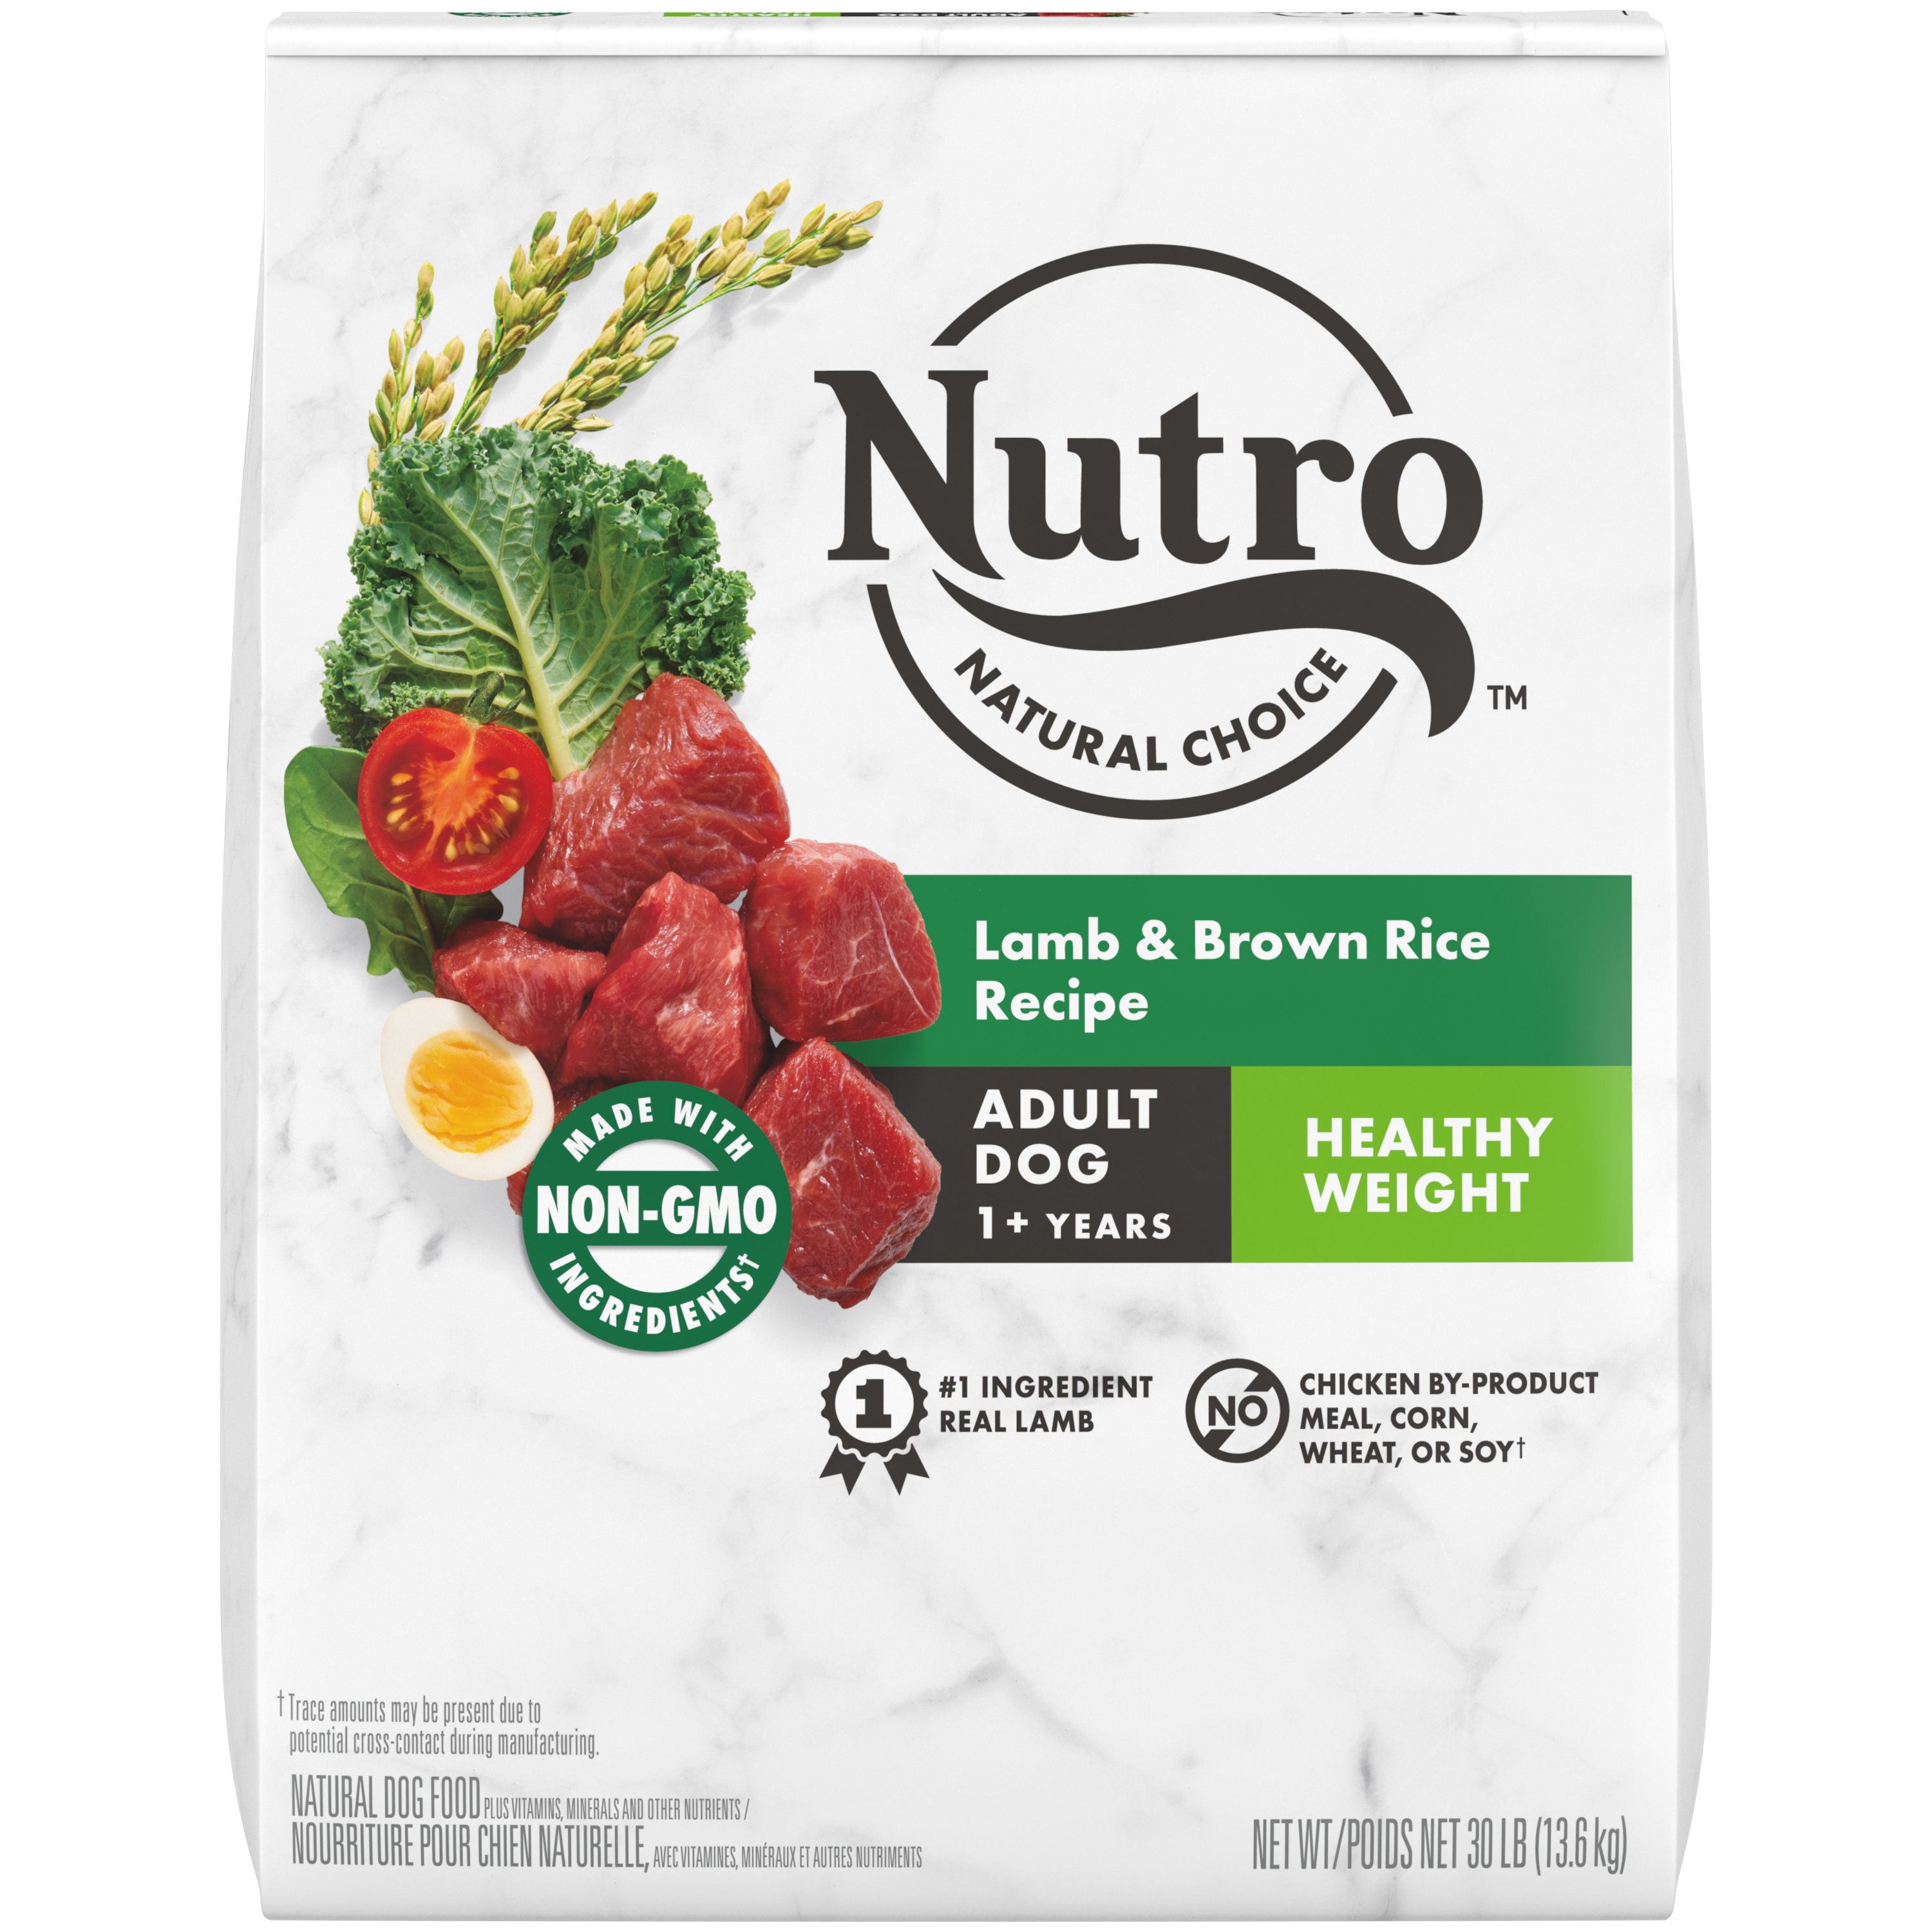 Nutro Natural Choice Lamb & Brown Rice, Dry Dog Food for Healthy Weight Adult Dog, 30 lb. Bag - image 1 of 13